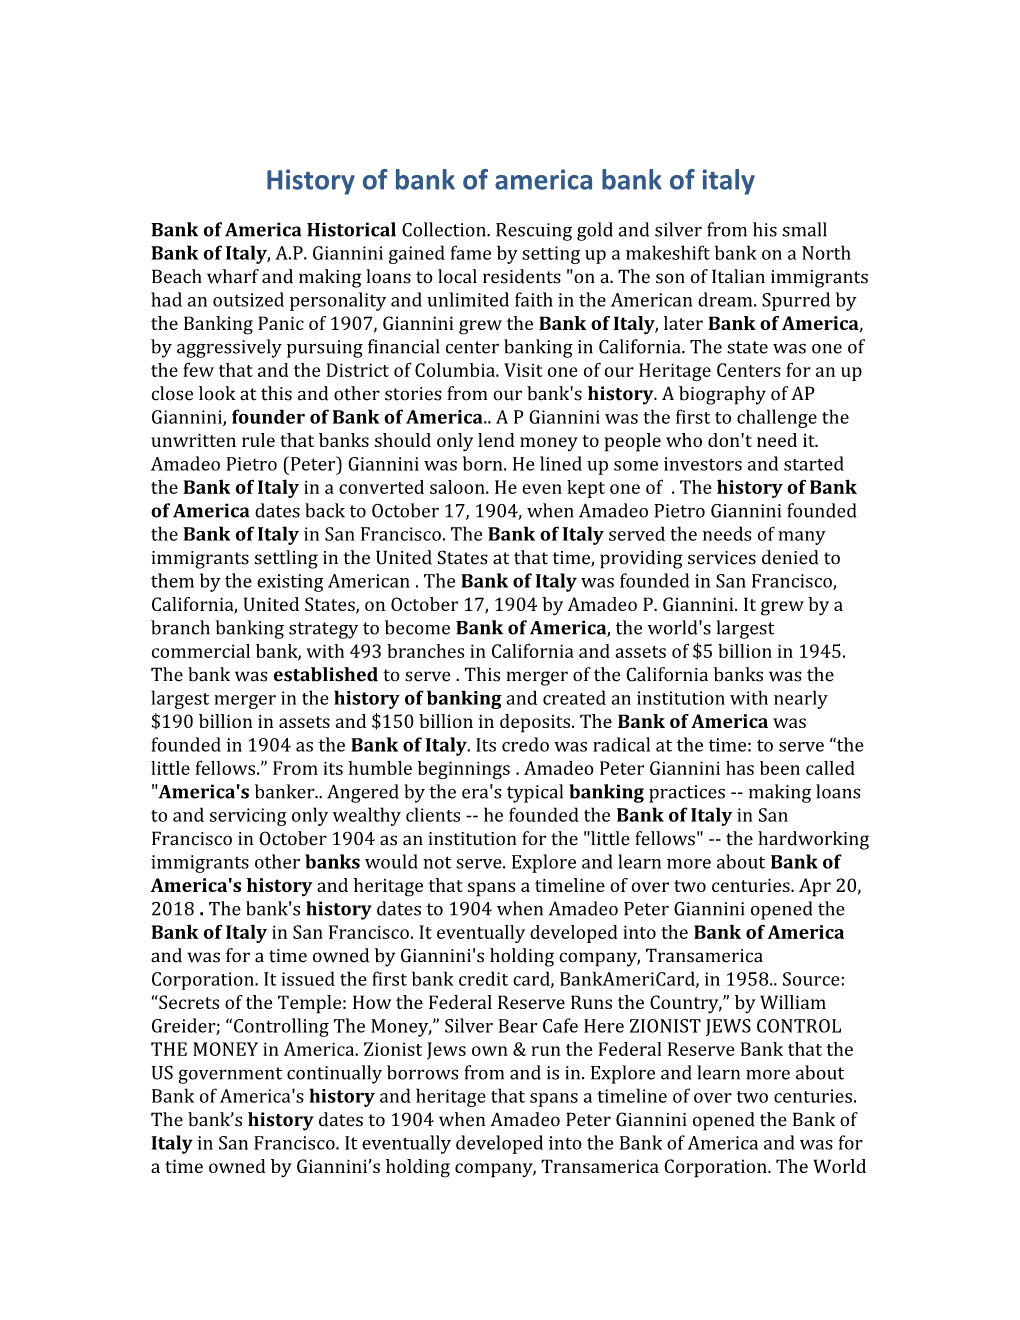 History of Bank of America Bank of Italy